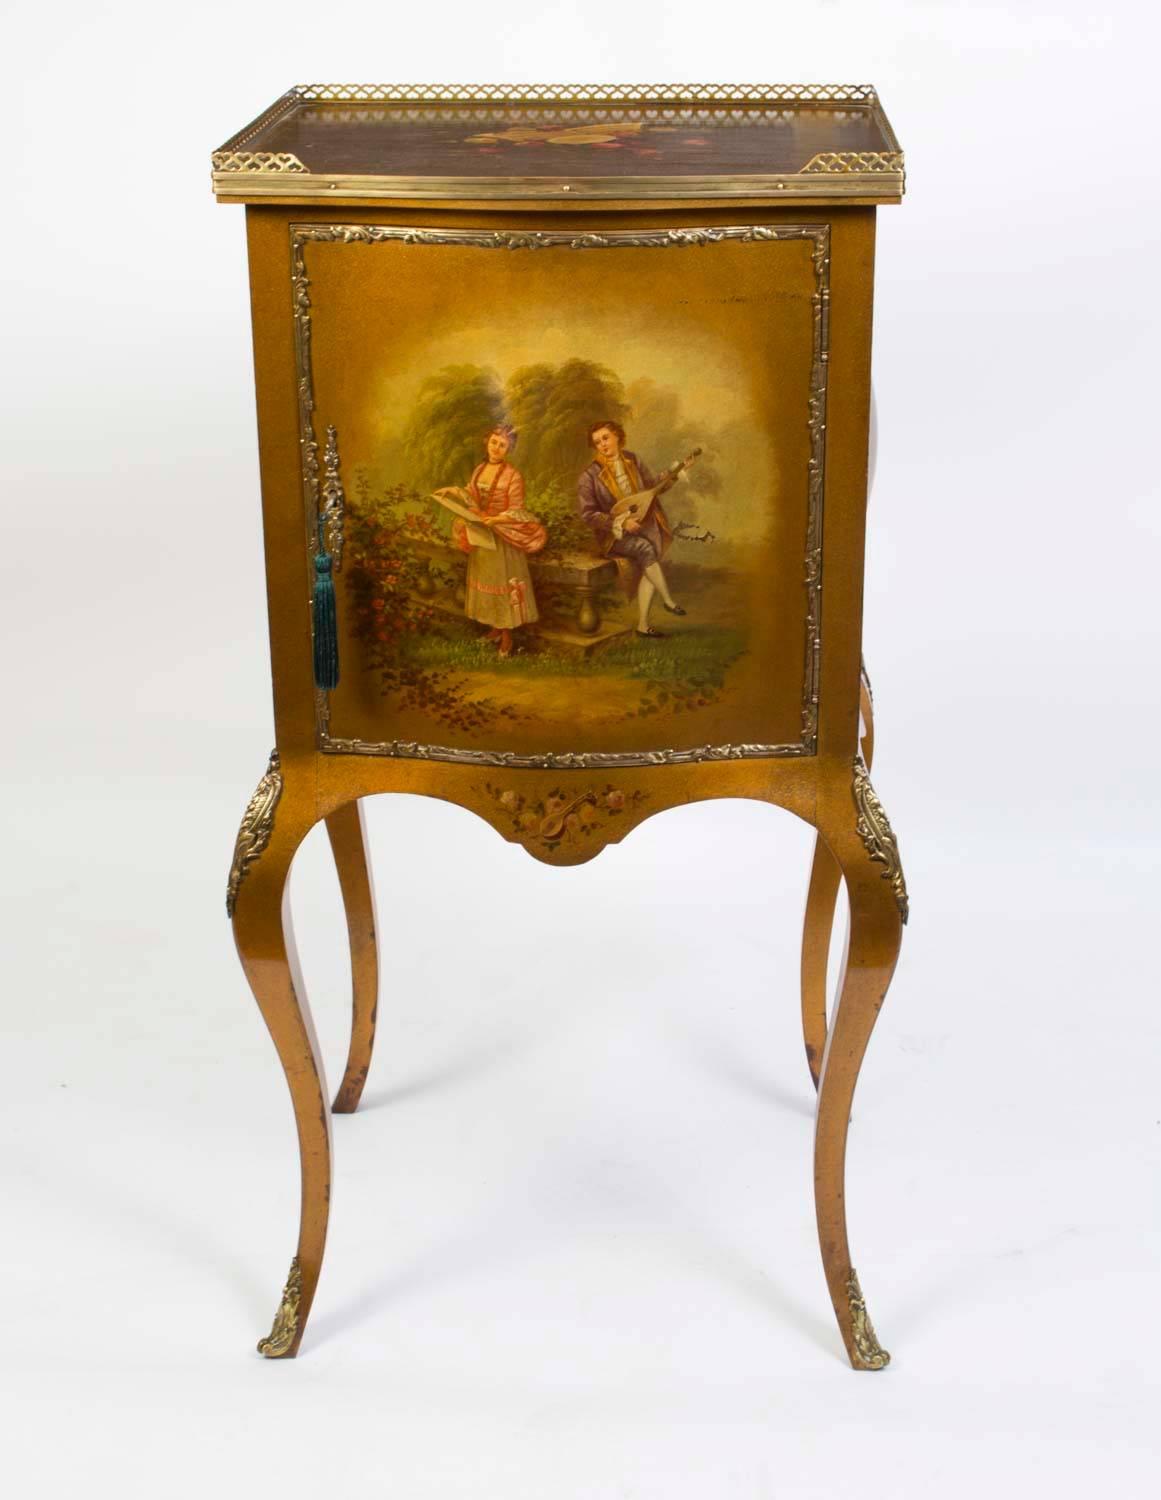 This is a lovely antique French Vernis Martin bombe shaped music cabinet, circa 1900.

The three quarter brass galleried top above the single cupboard door is painted with a vignette of lovers. The sides of the cabinet depict countryside scenery